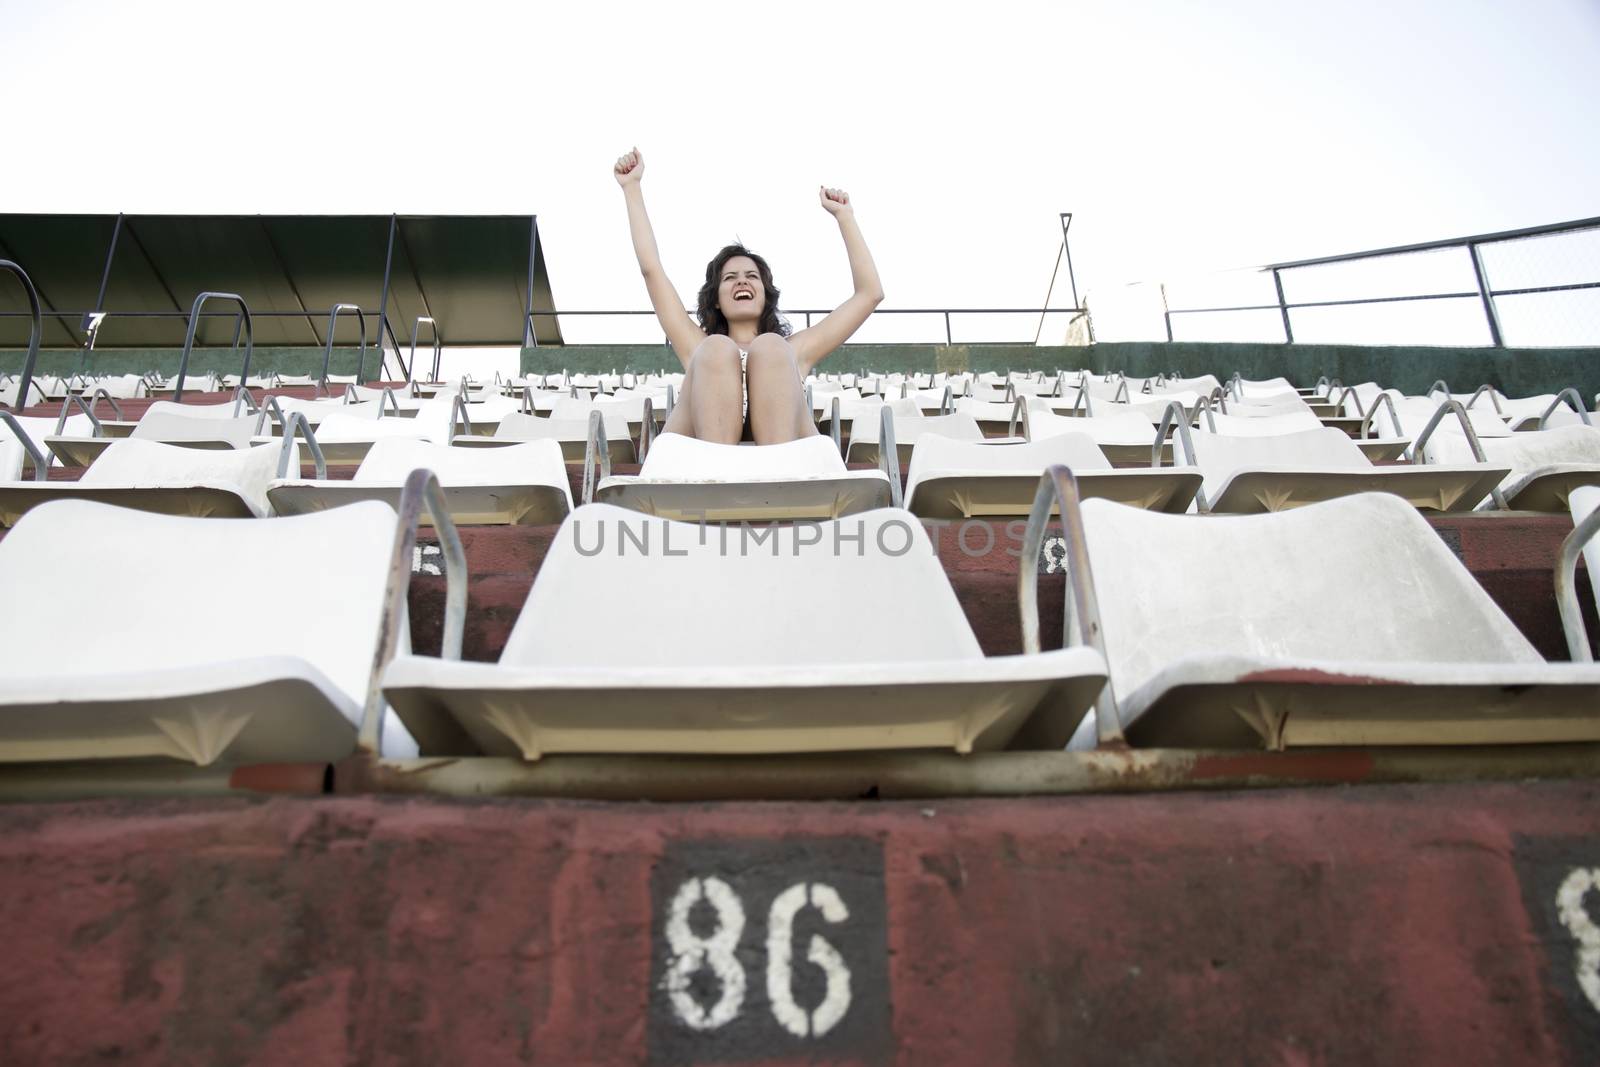 Retro cheering girl in stadium by Spectral